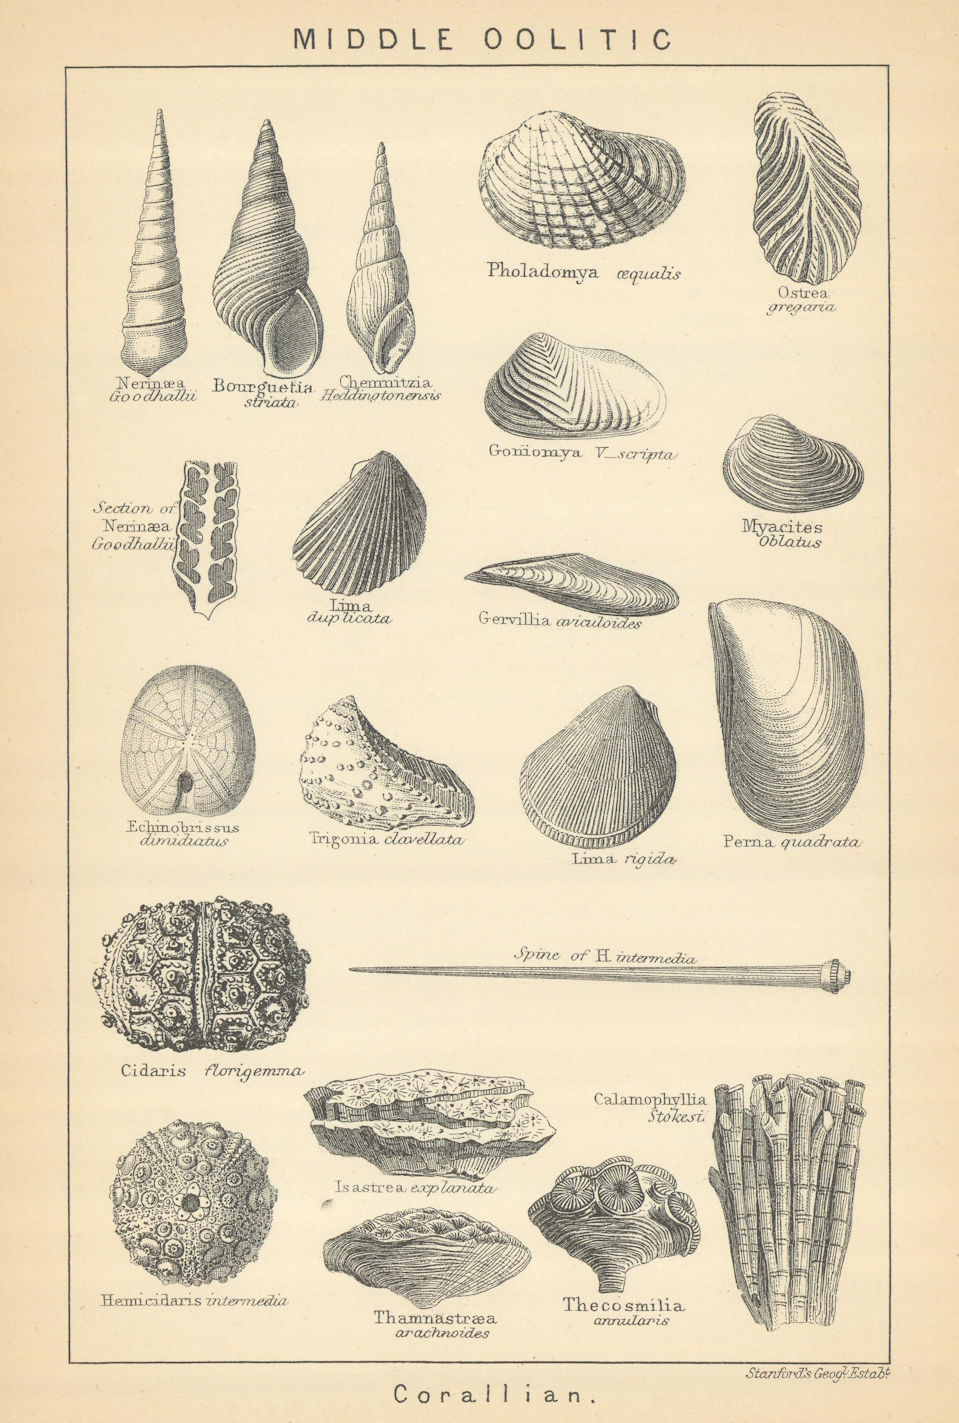 Associate Product BRITISH FOSSILS. Middle Oolitic - Corallian. STANFORD 1904 old antique print